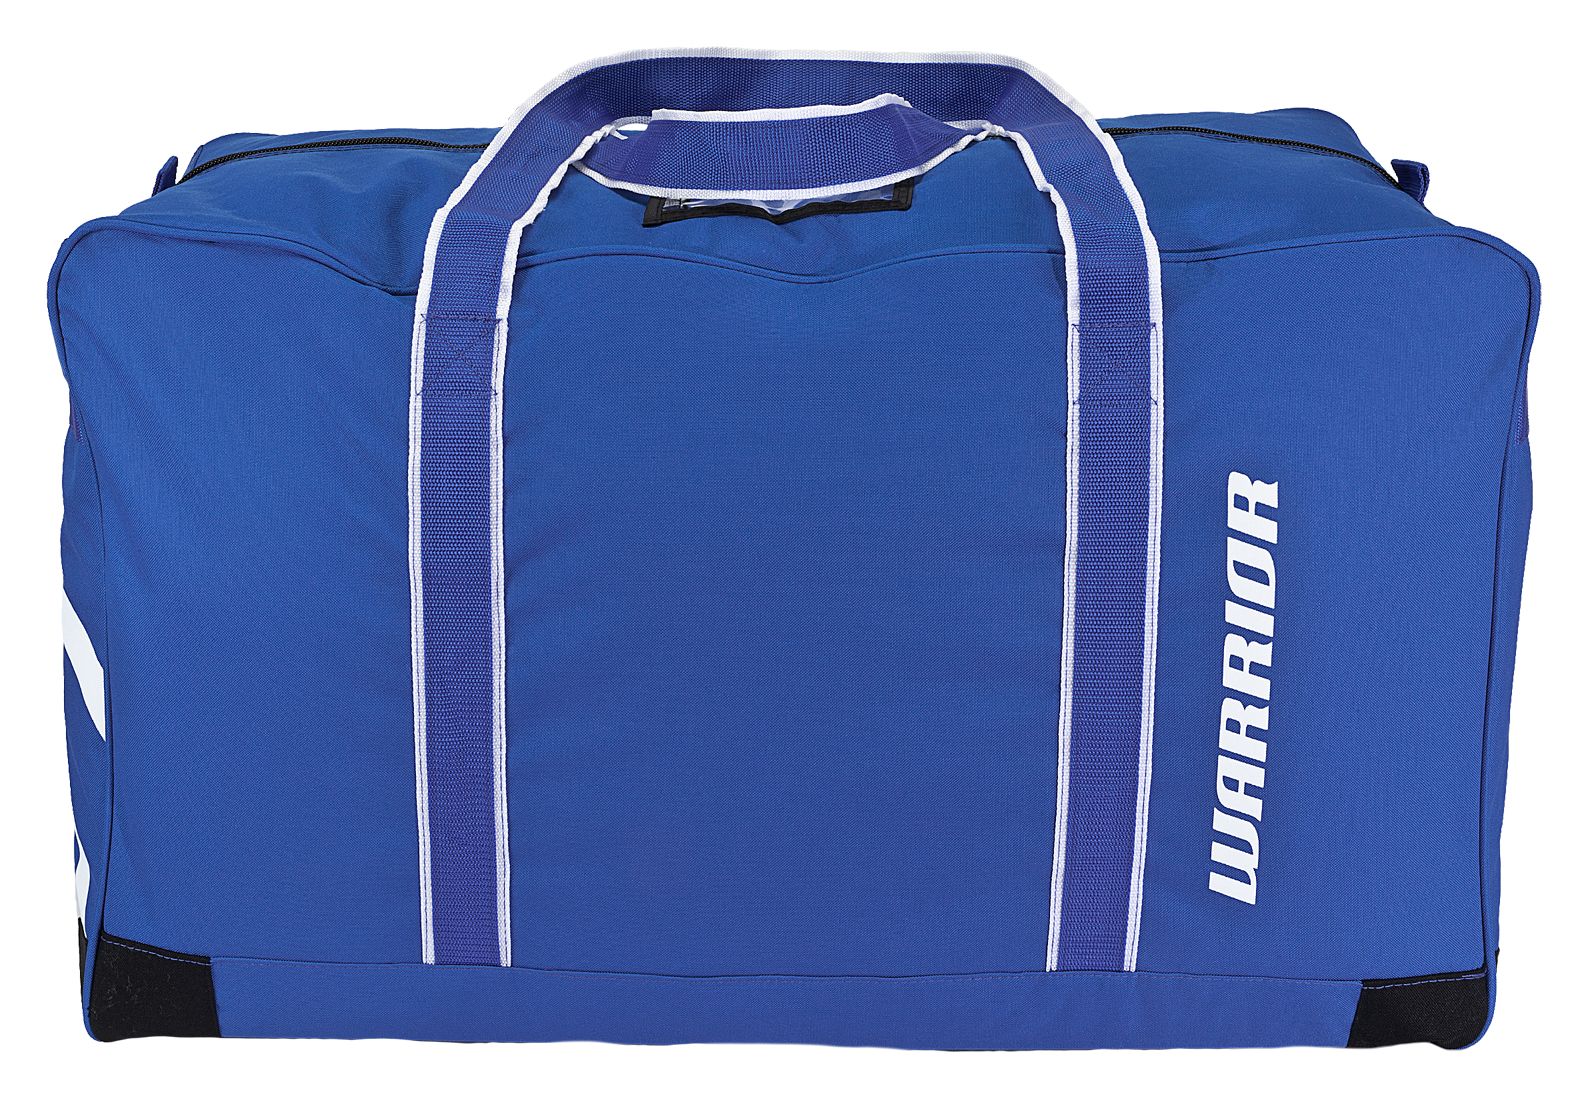 Team Duffel Bag Medium, Royal Blue with White image number 3